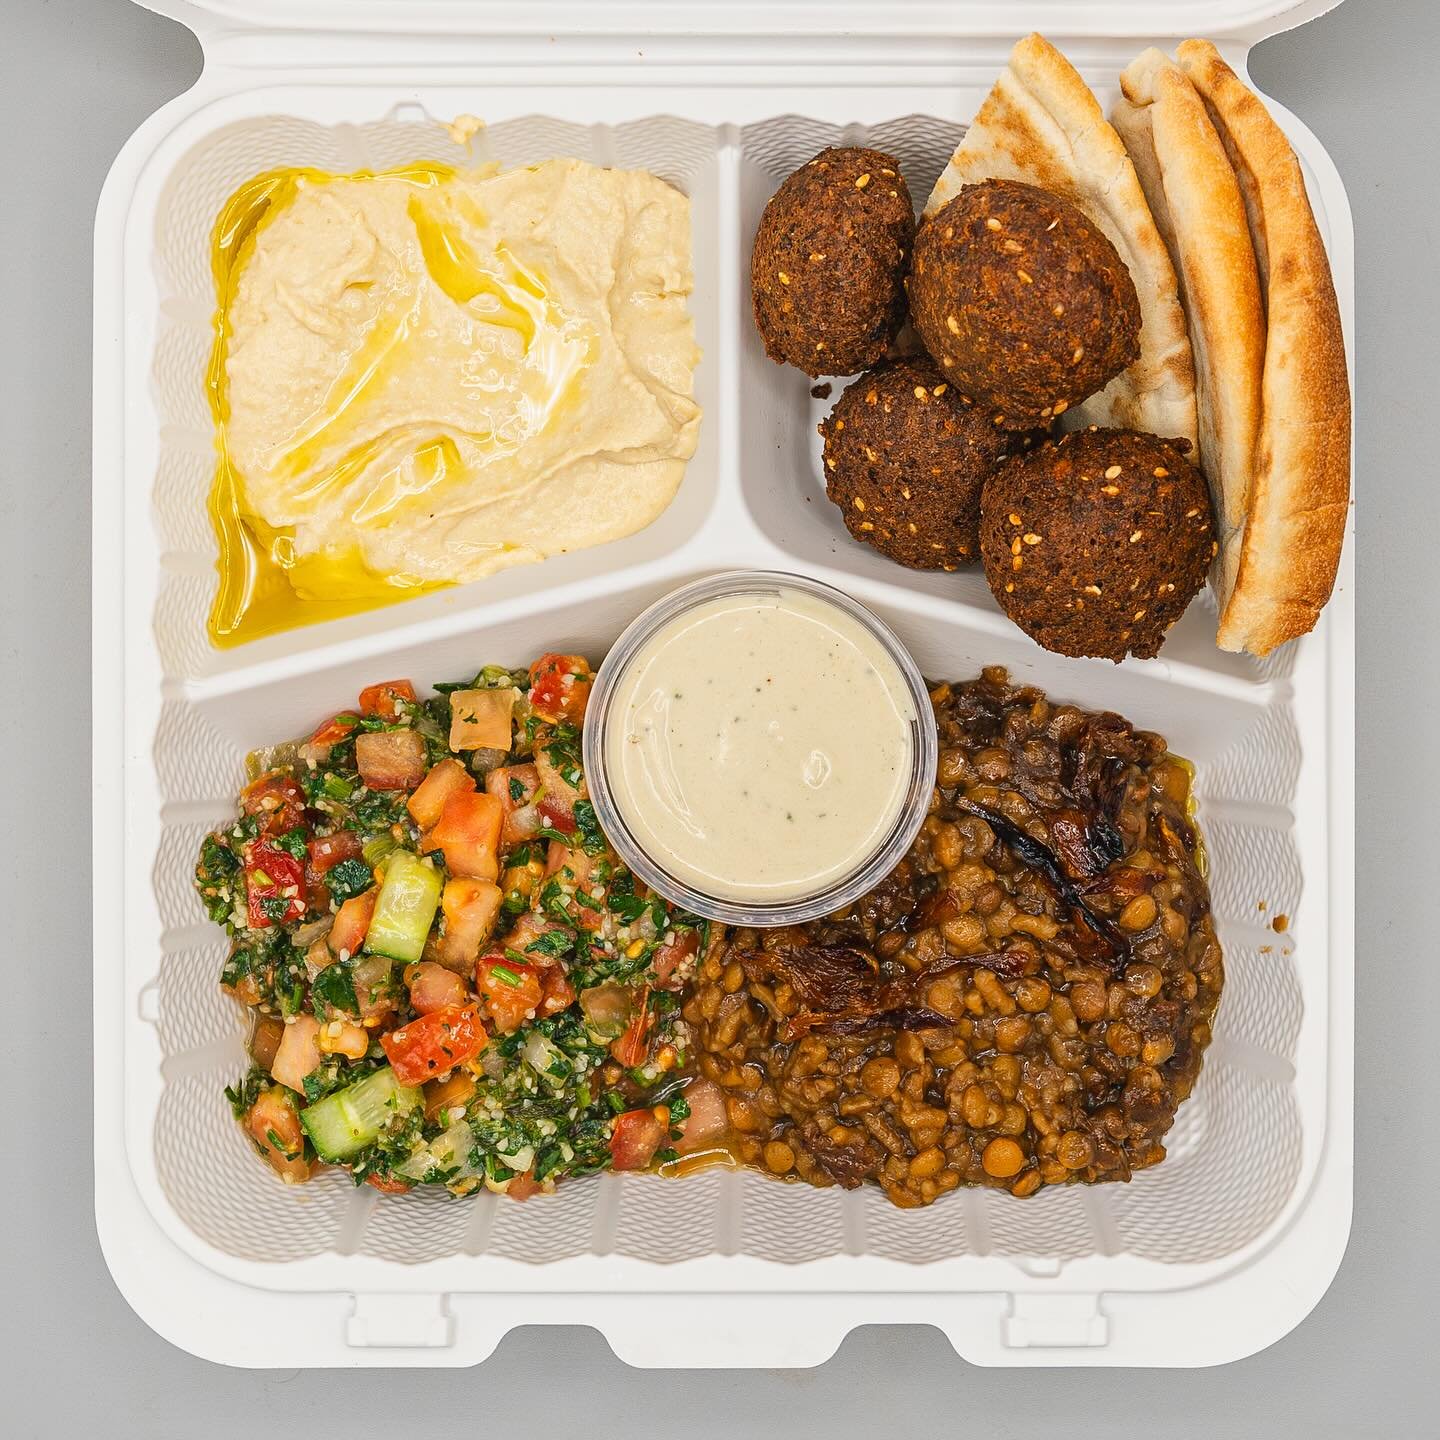 Made 100% in-house, Aviva&rsquo;s falafel is a generational family recipe! We grind garbanzo beans with veggies, herbs, and spices and then fry them in 100% Olive Oil! Have it as a plate with 4 Falafel plus your choice of 3 sides. Comes with tahini a